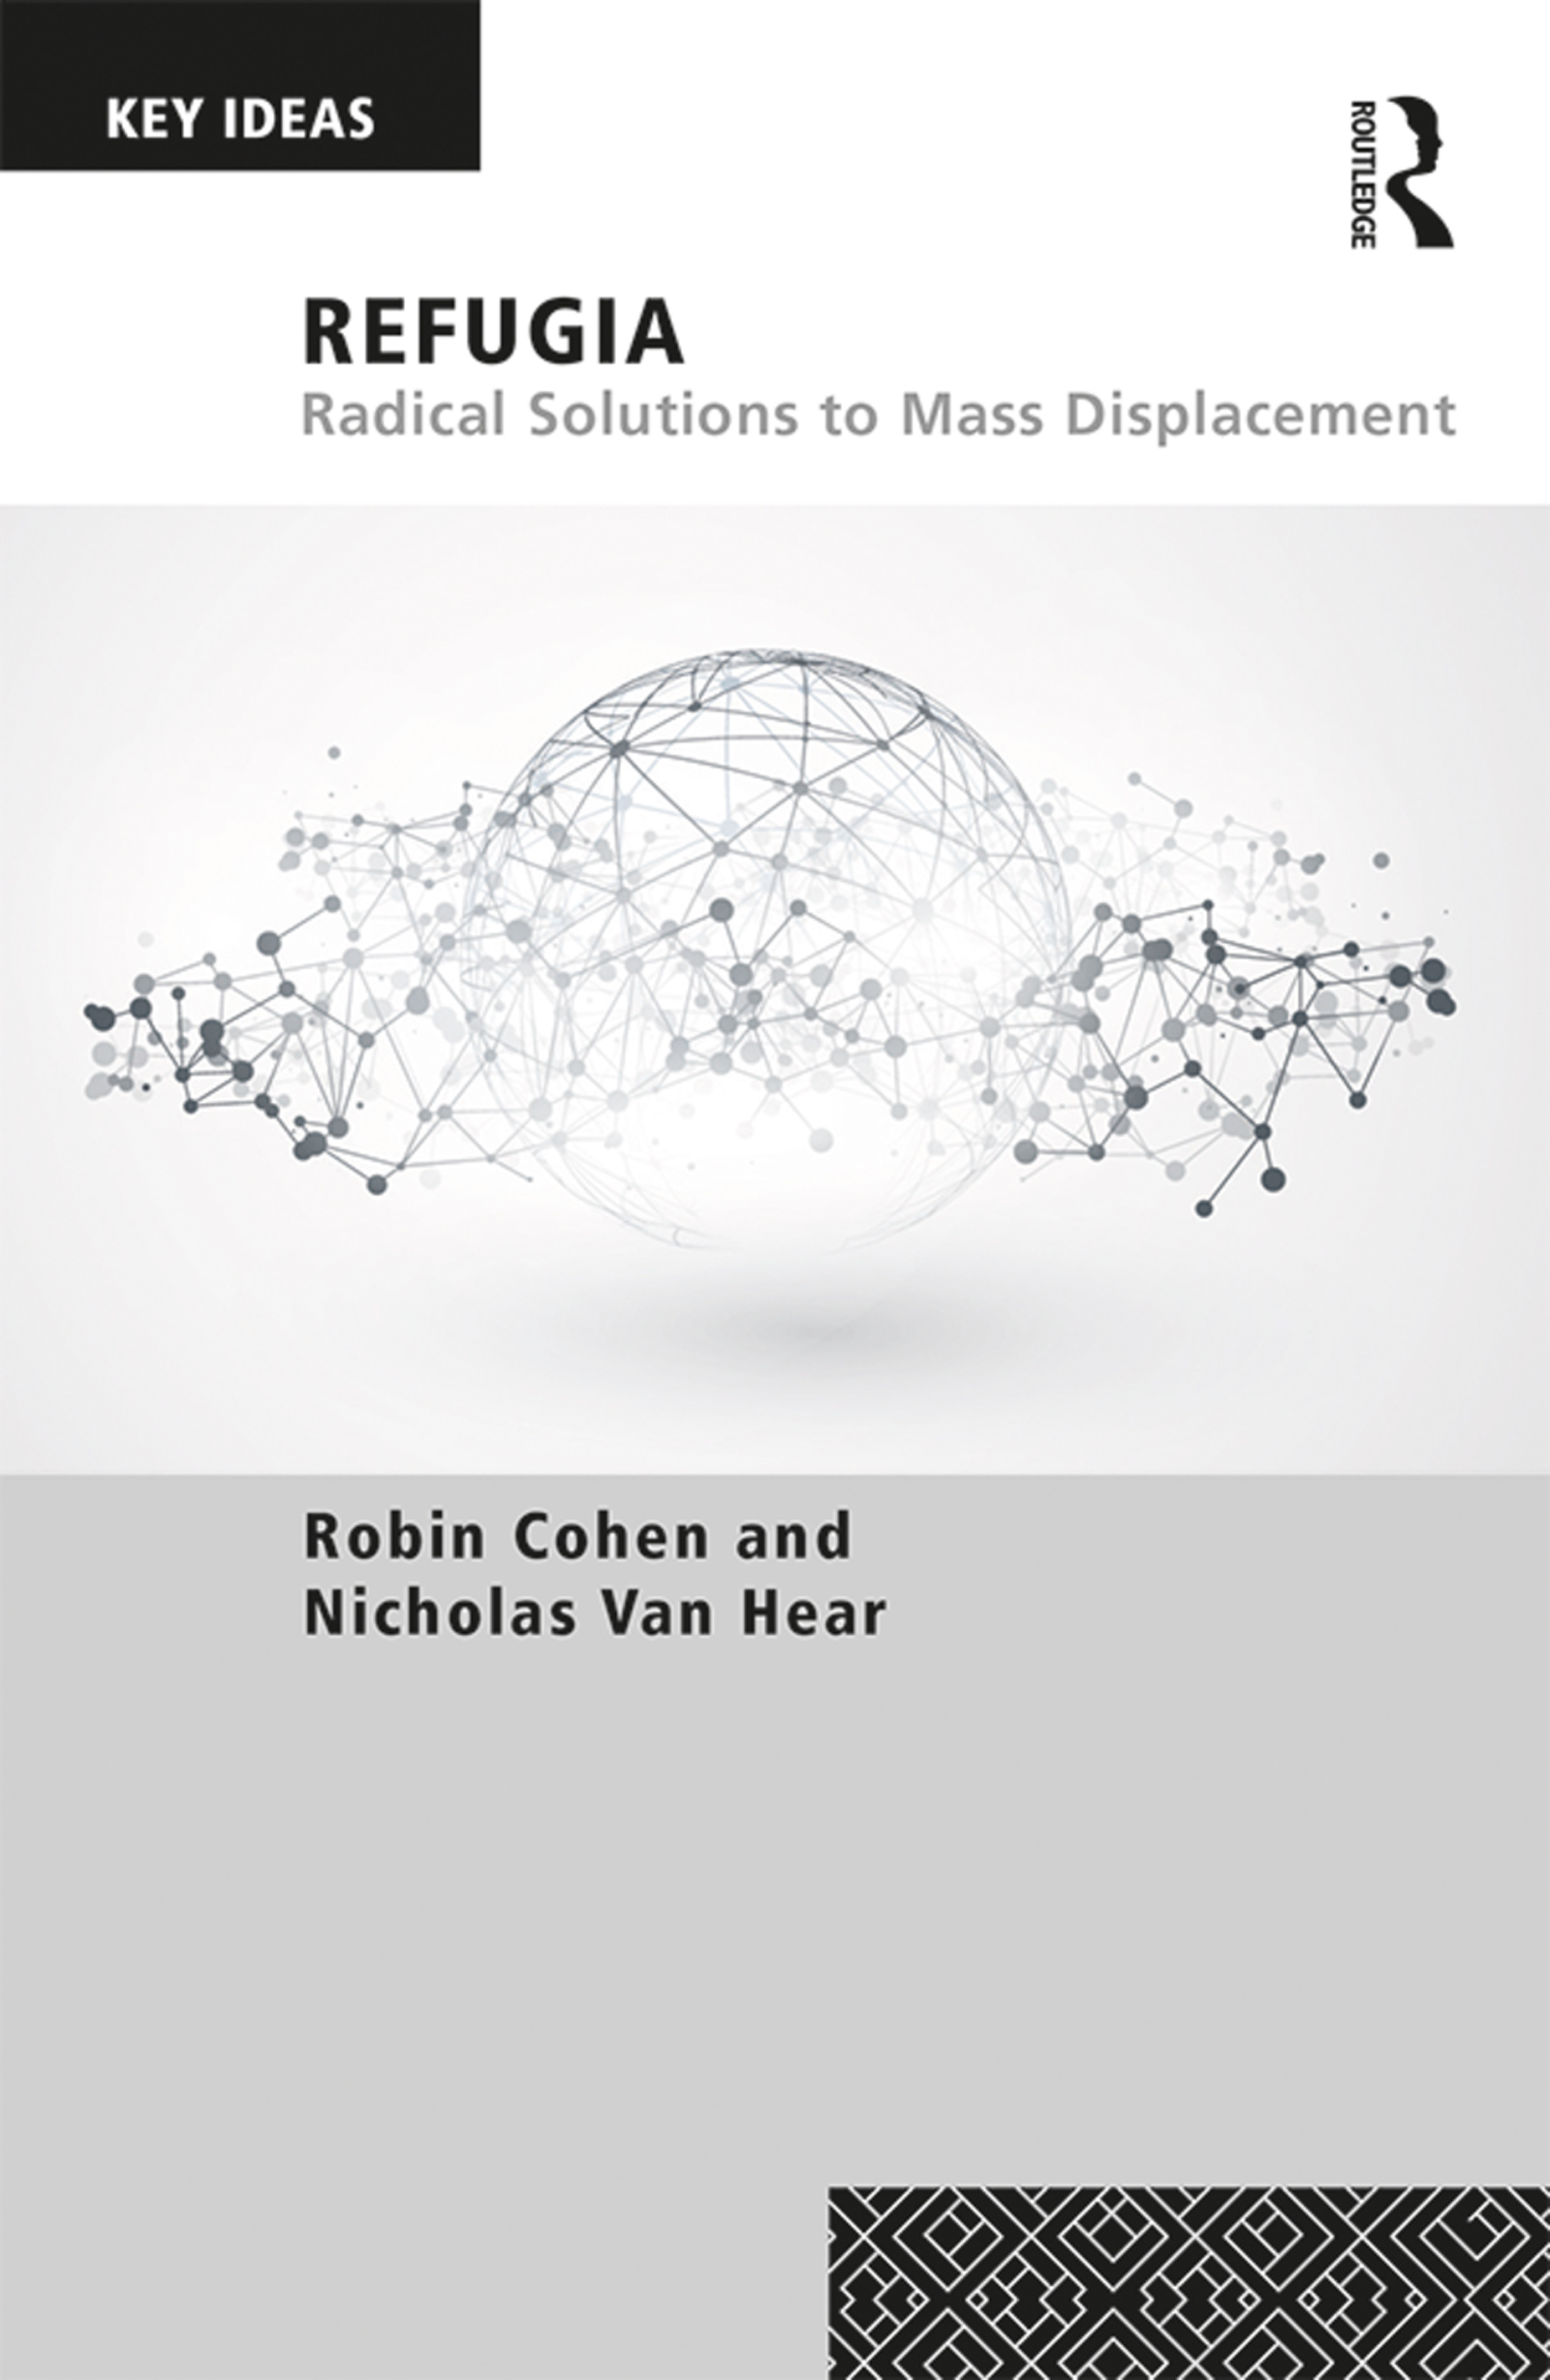 Picture of globe, Refugia Radical Solutions to Mass Displacement book cover